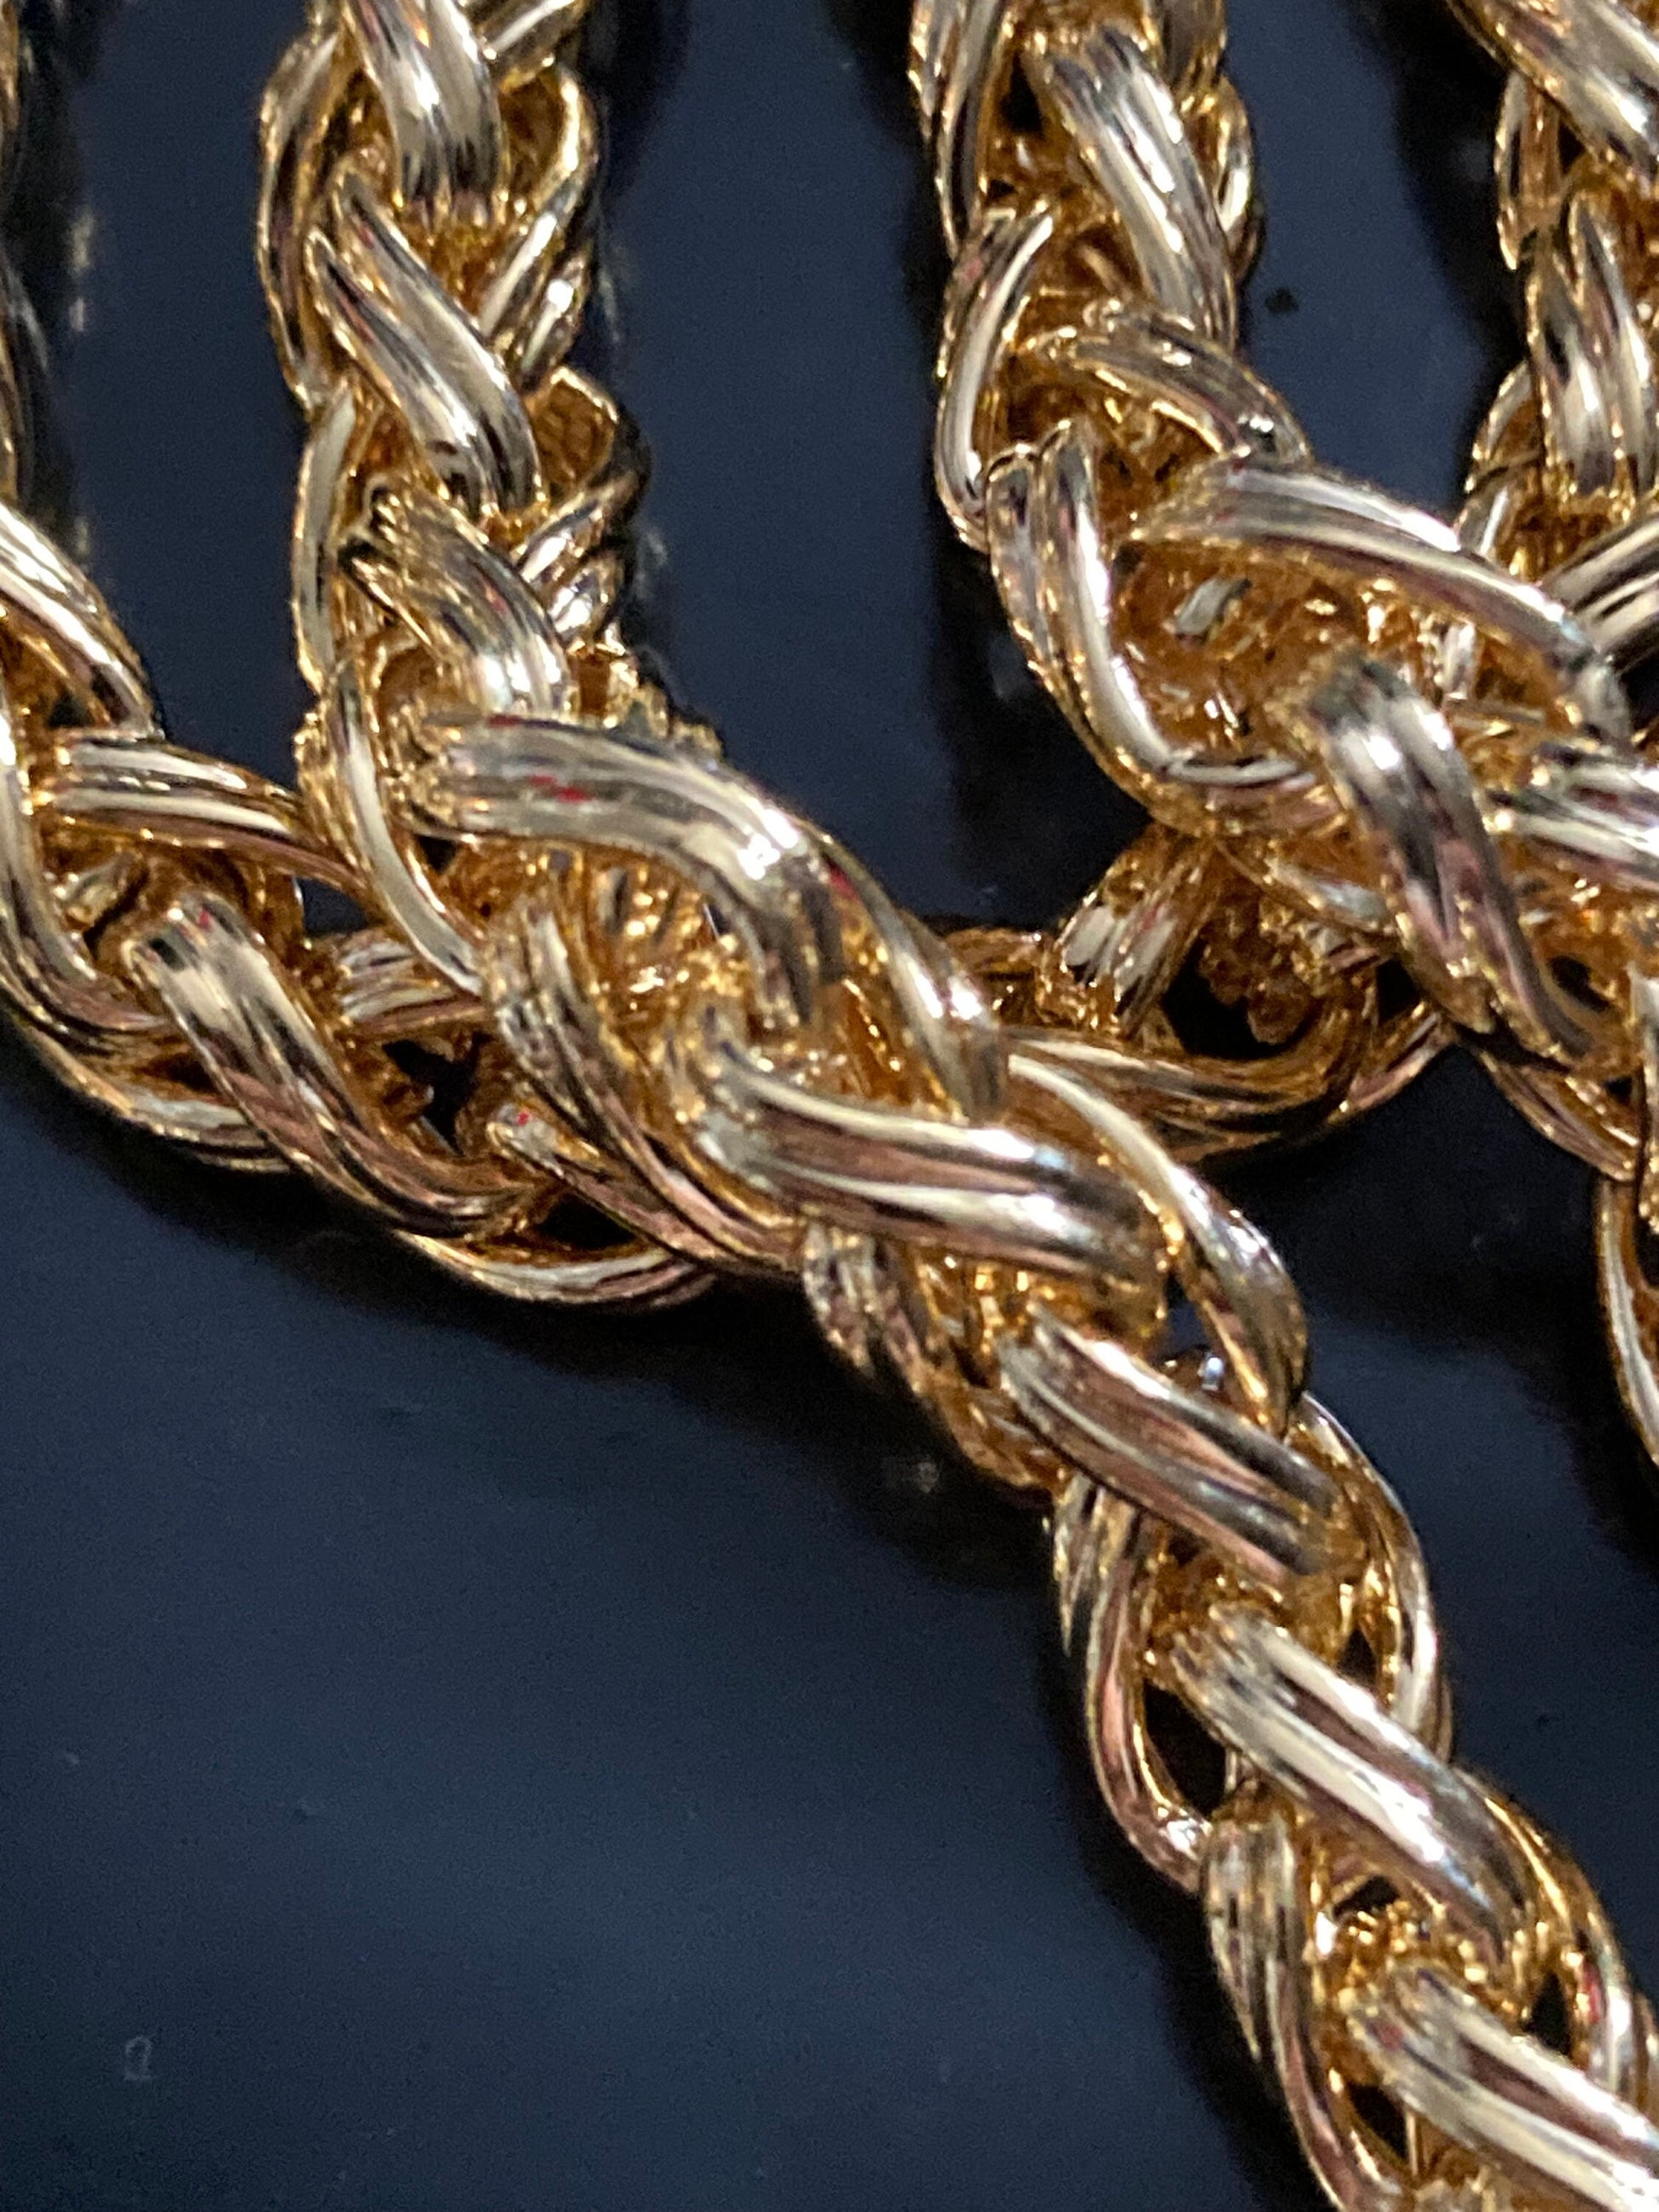 37.5” 95cm extra long 1980s thick gold plated woven wheat chain necklace